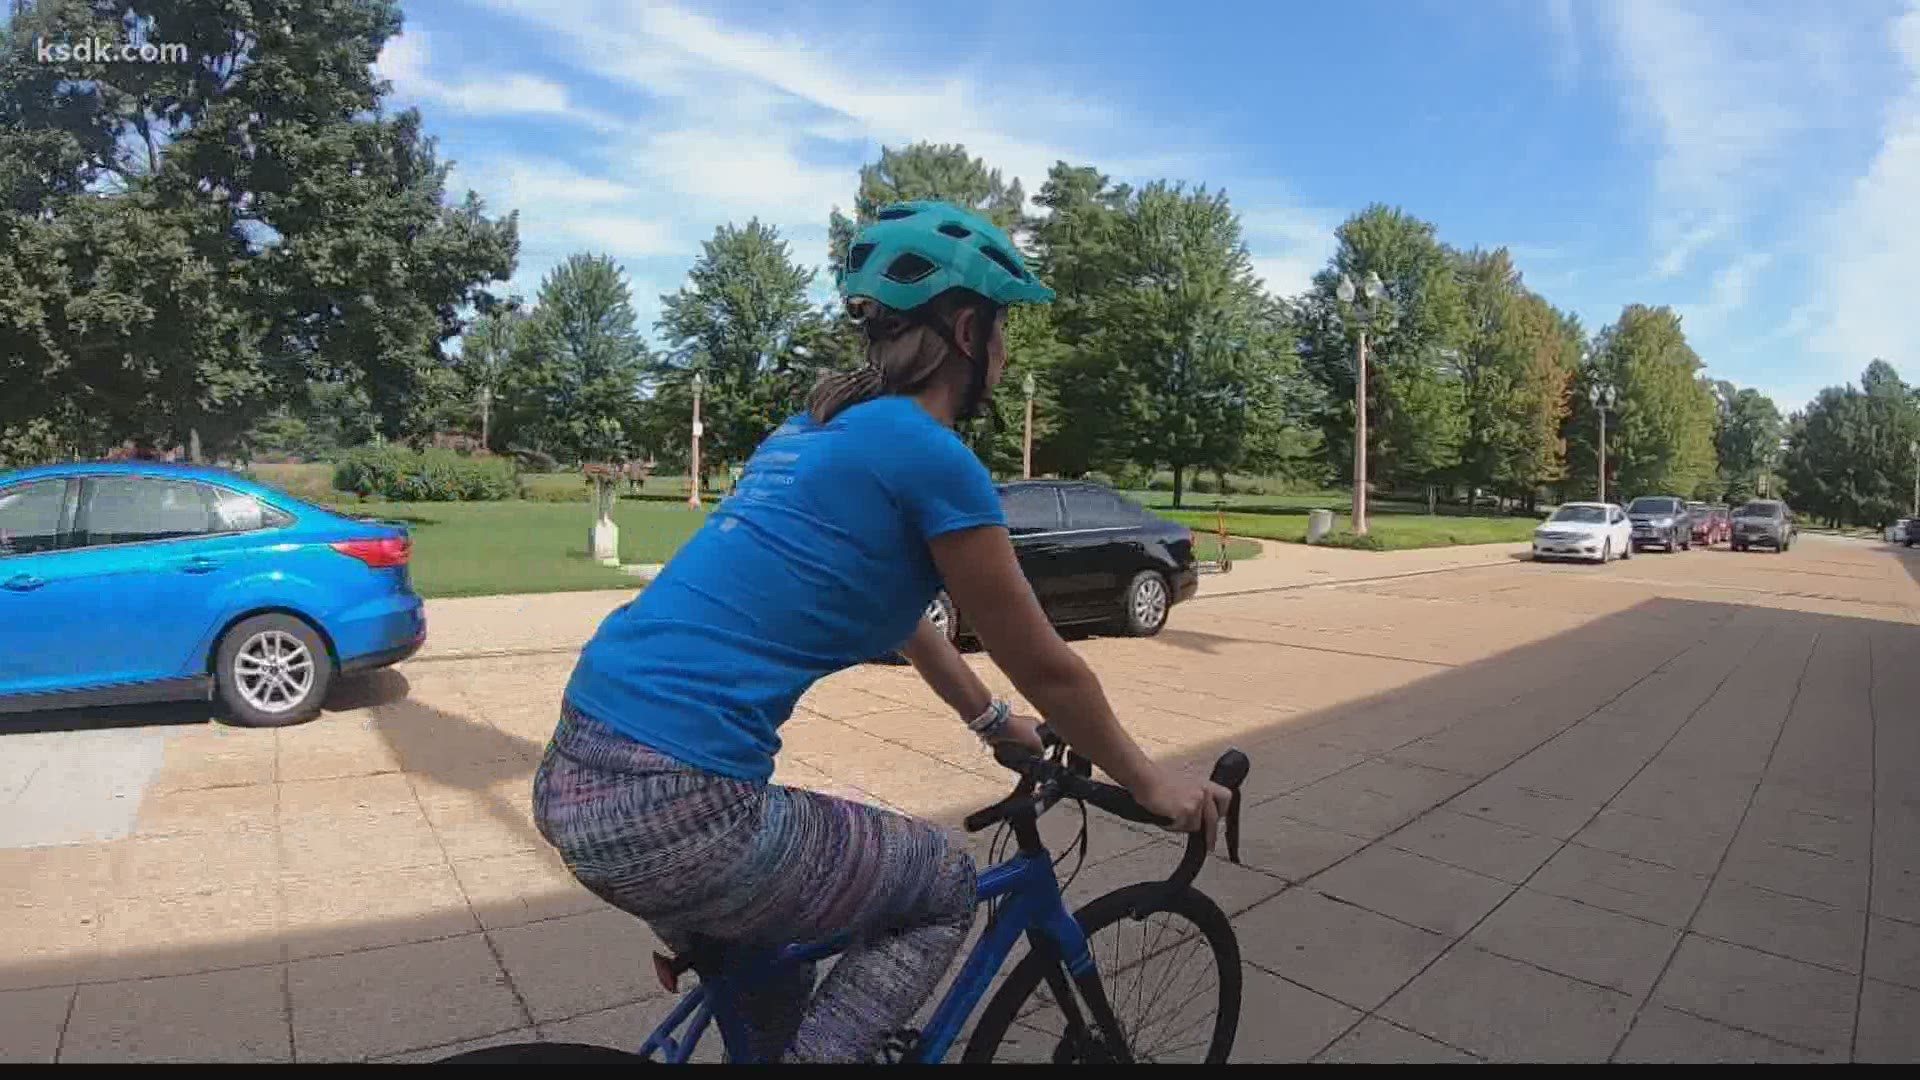 Randelynn Vasel is doing all she can to support cancer research in the St. Louis area. She hopes her efforts not only raise money, but also inspire others.